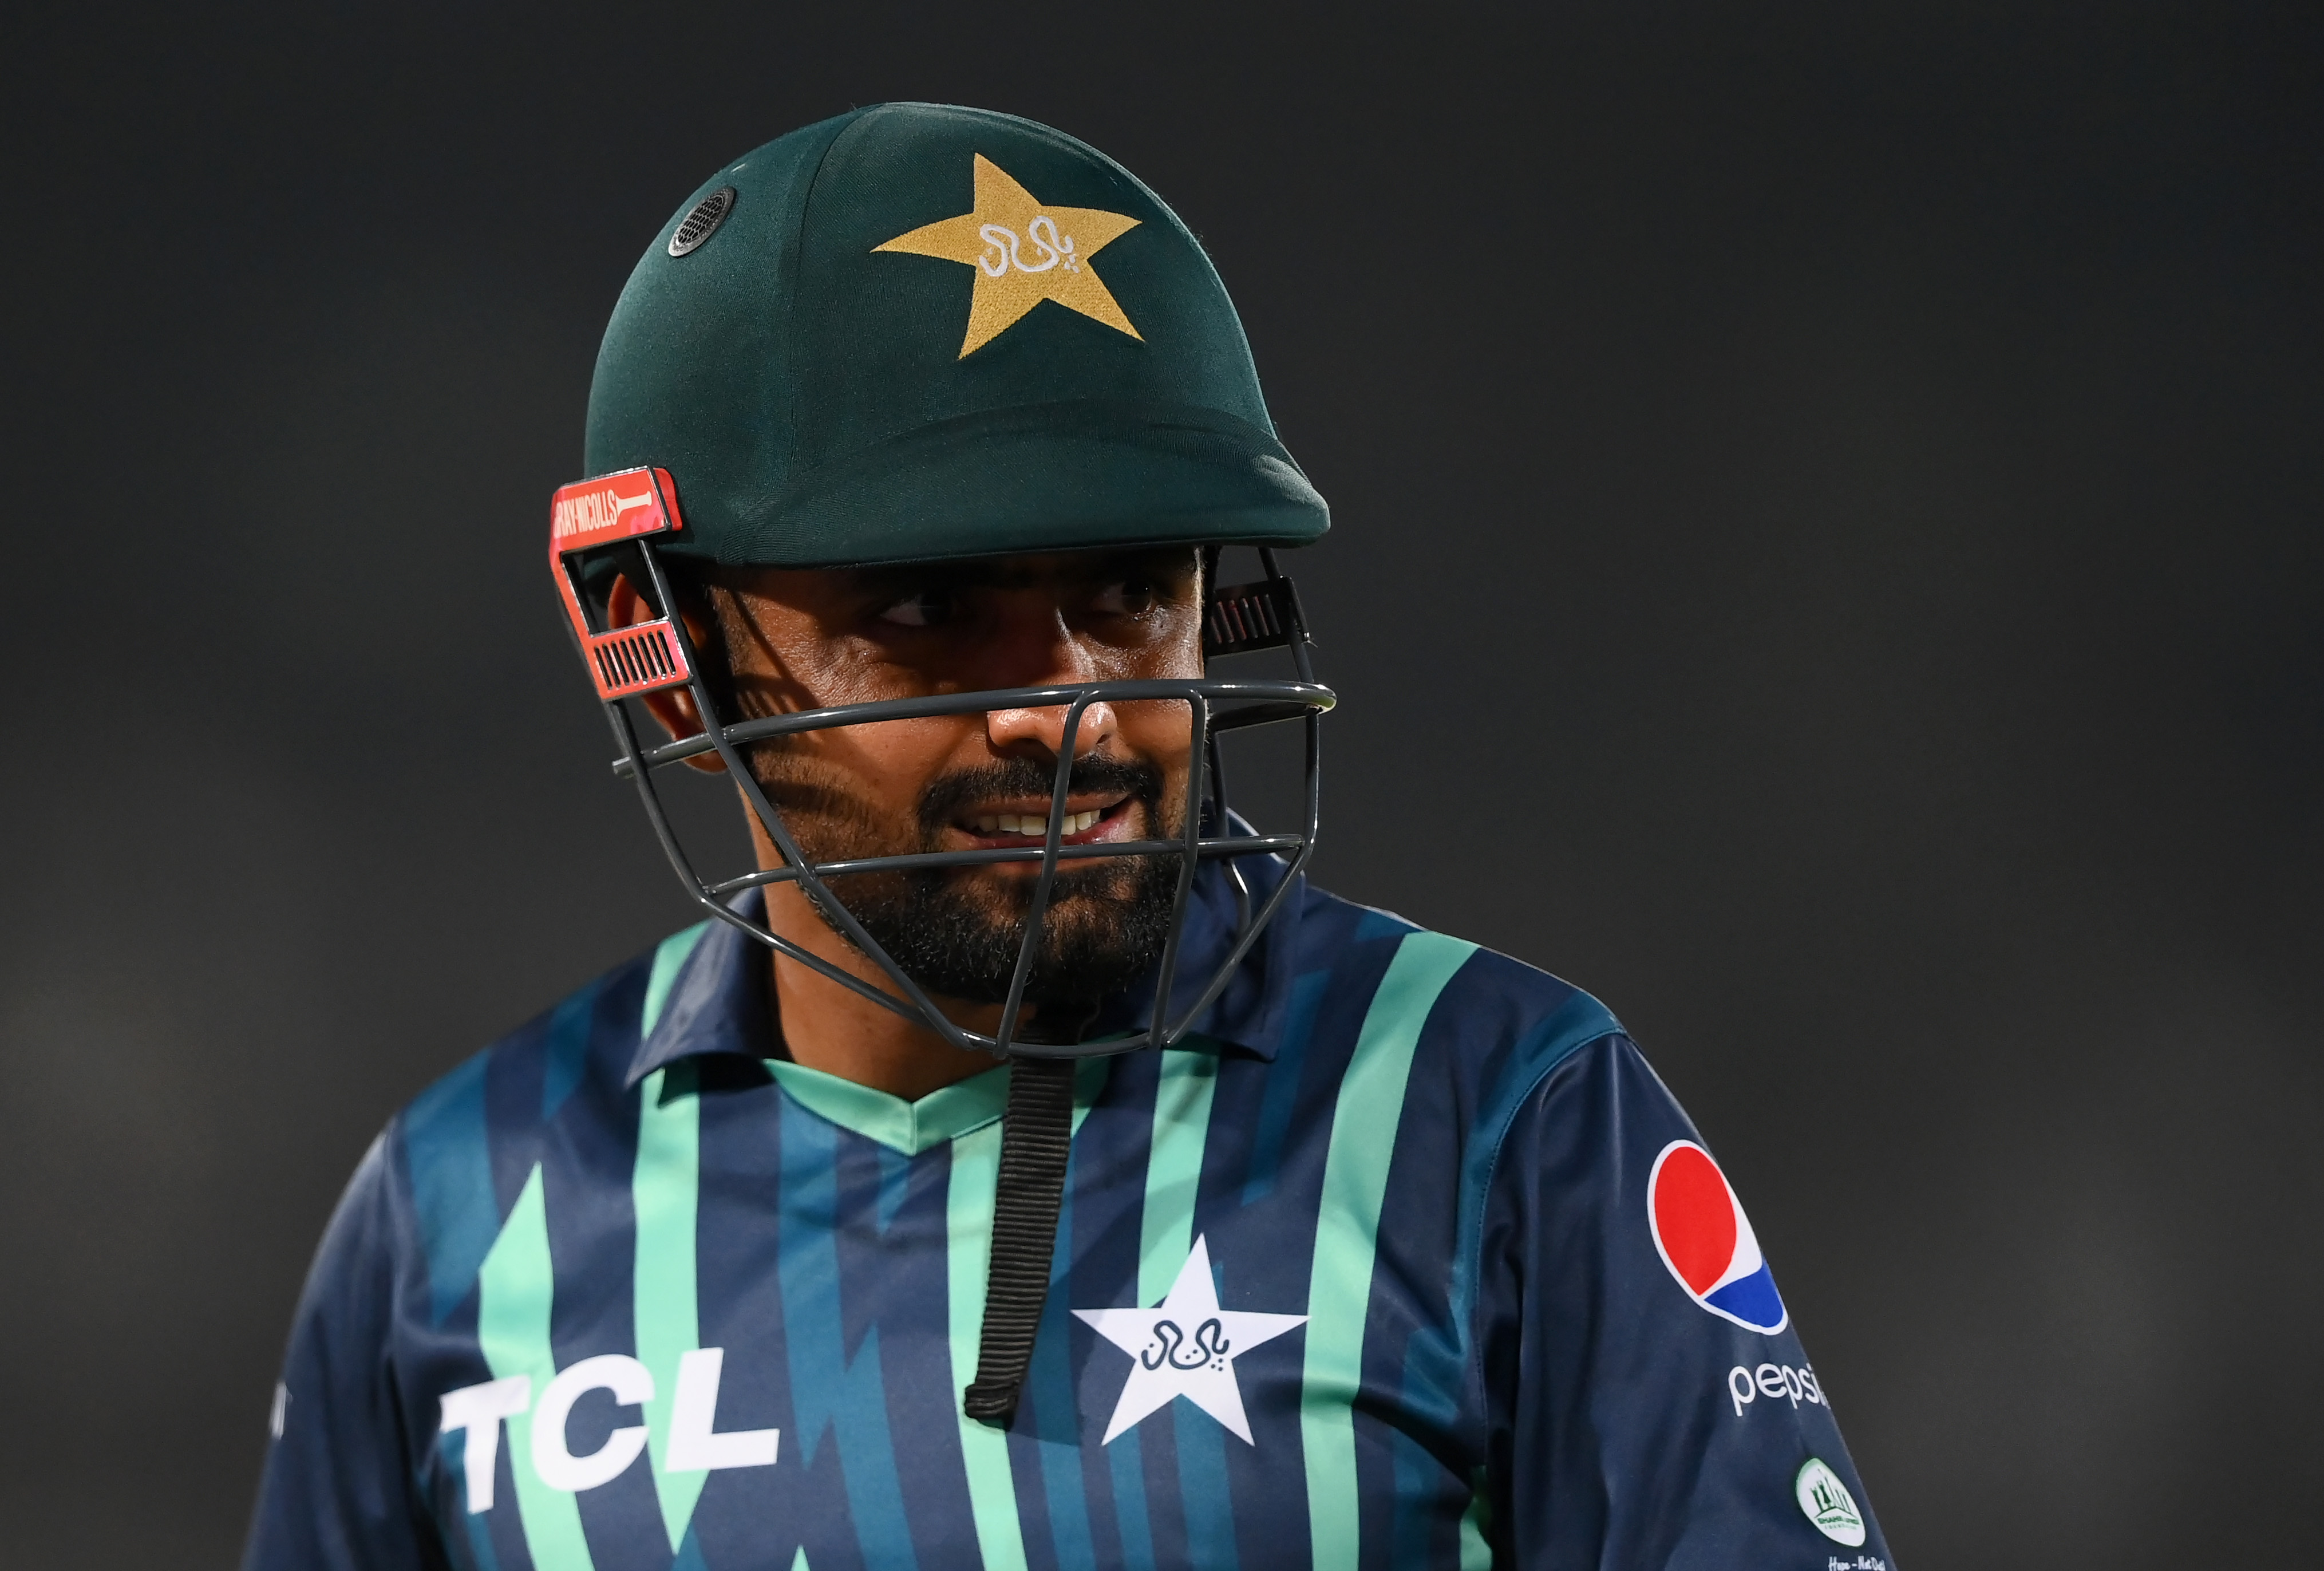 PAK vs ENG 2022 Trying to keep our middle order flexible and use it according to situation, reveals Babar Azam